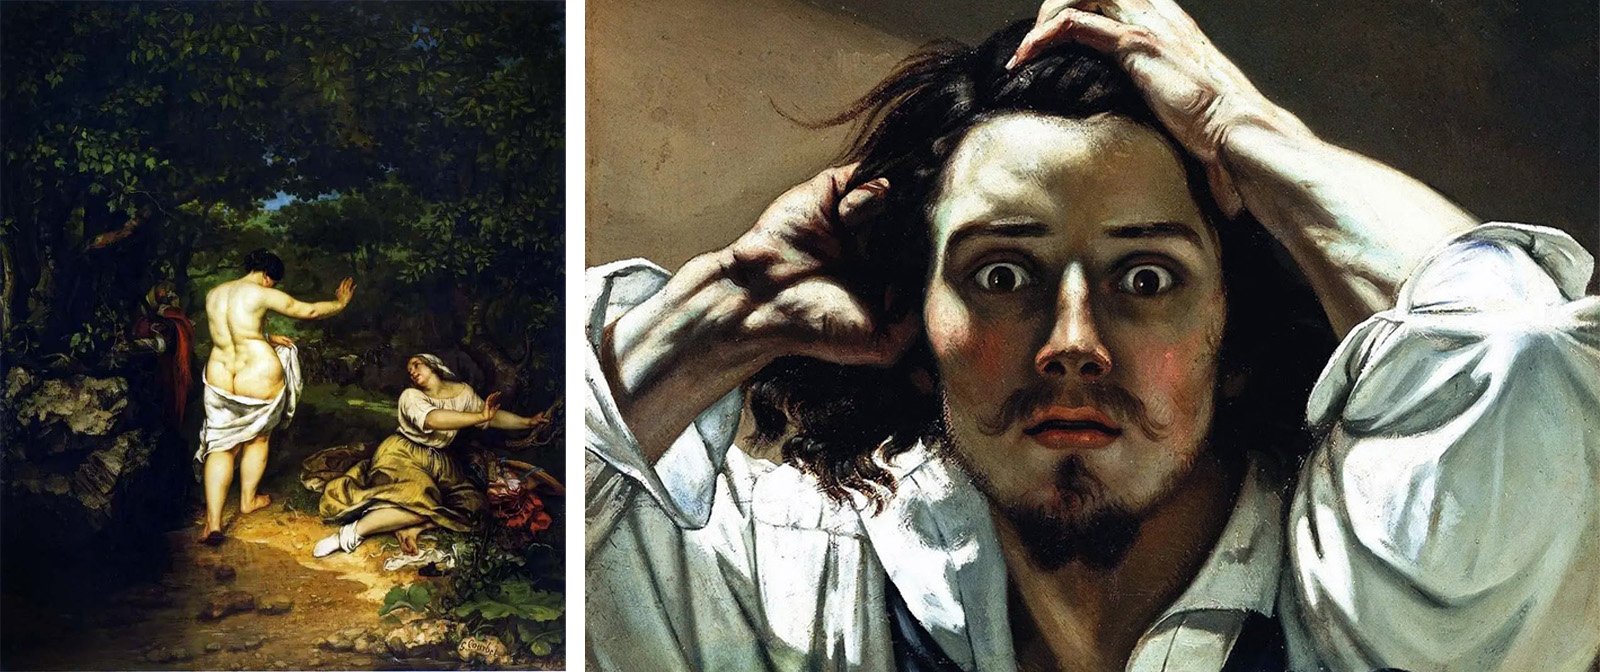 Demolished the Vendôme Column in Paris and painted paintings that were not understood by critics. Disgraced artist Gustave Courbet.